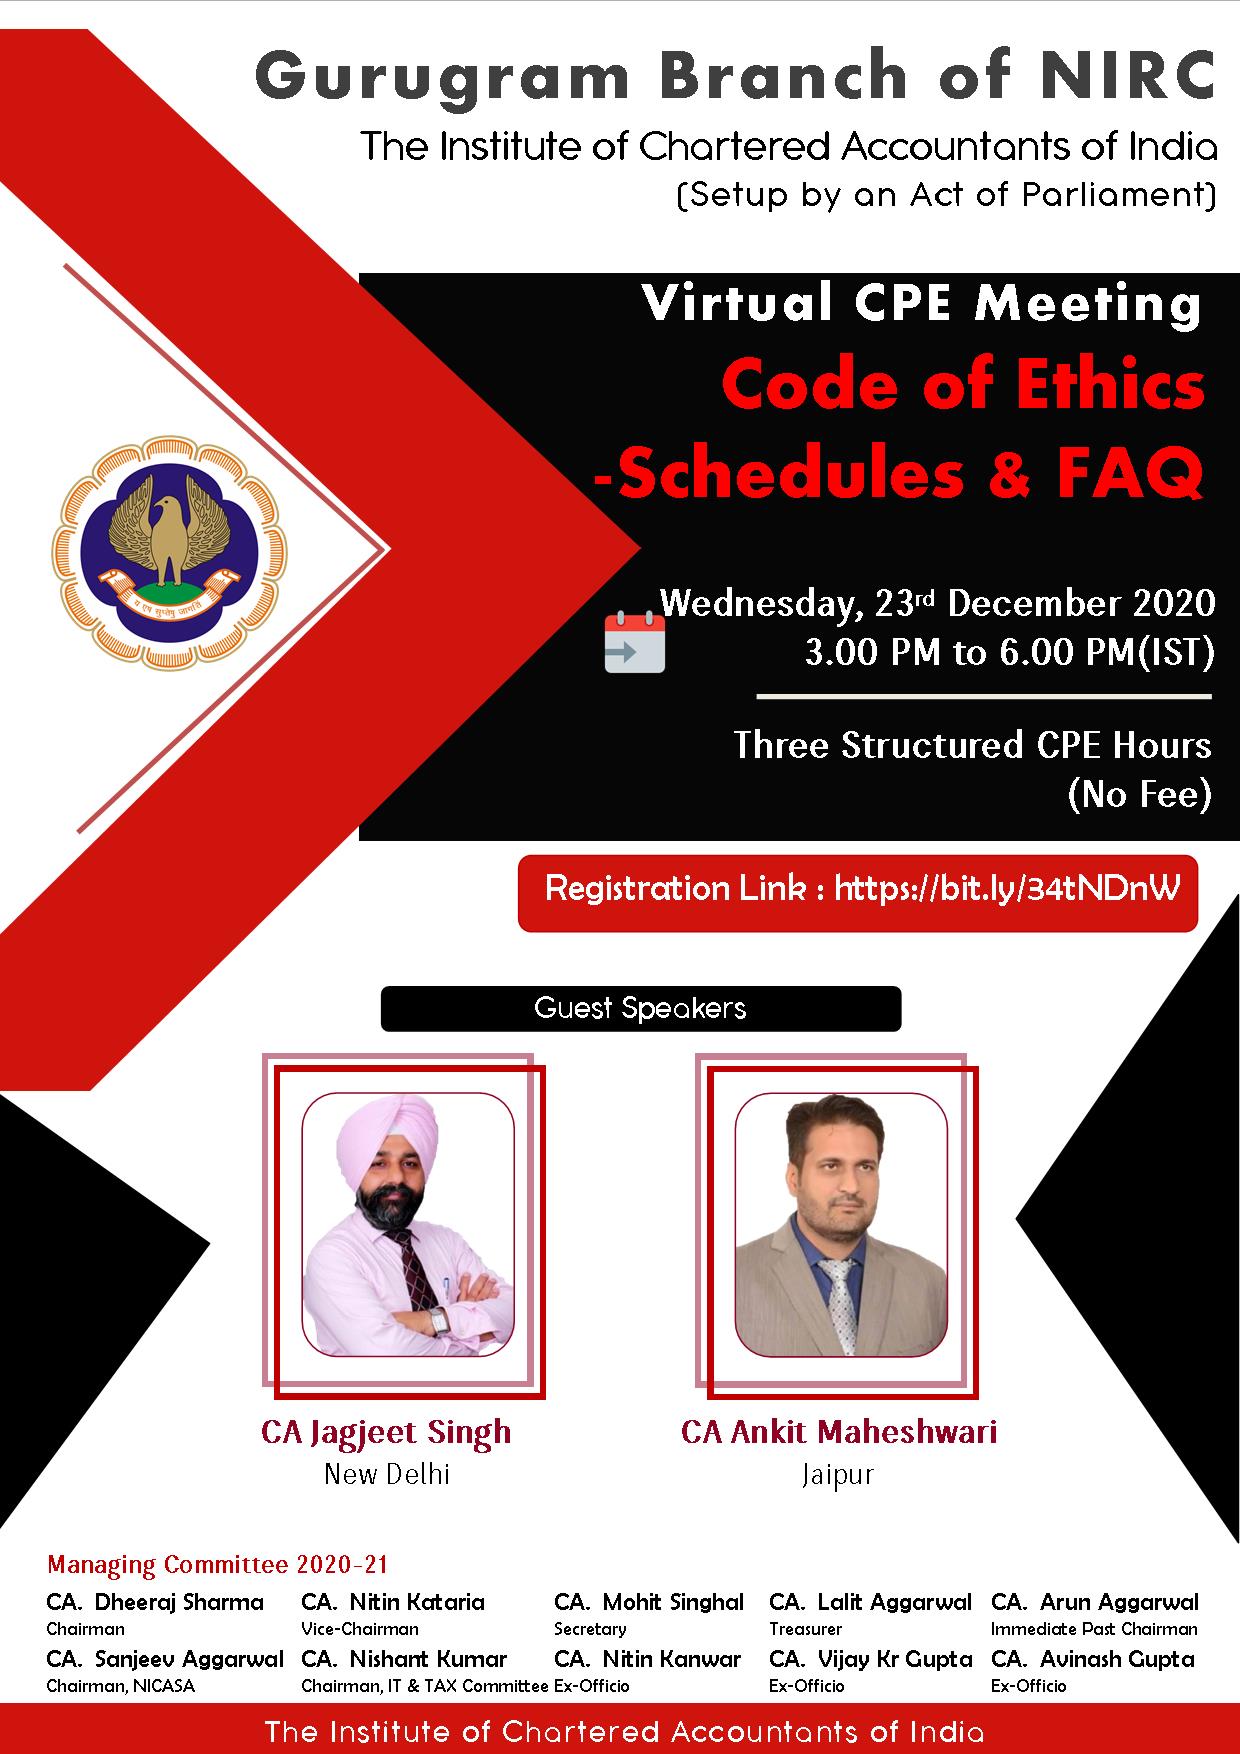 Virtual CPE Meeting on Code of Ethics-Schedules & FAQ